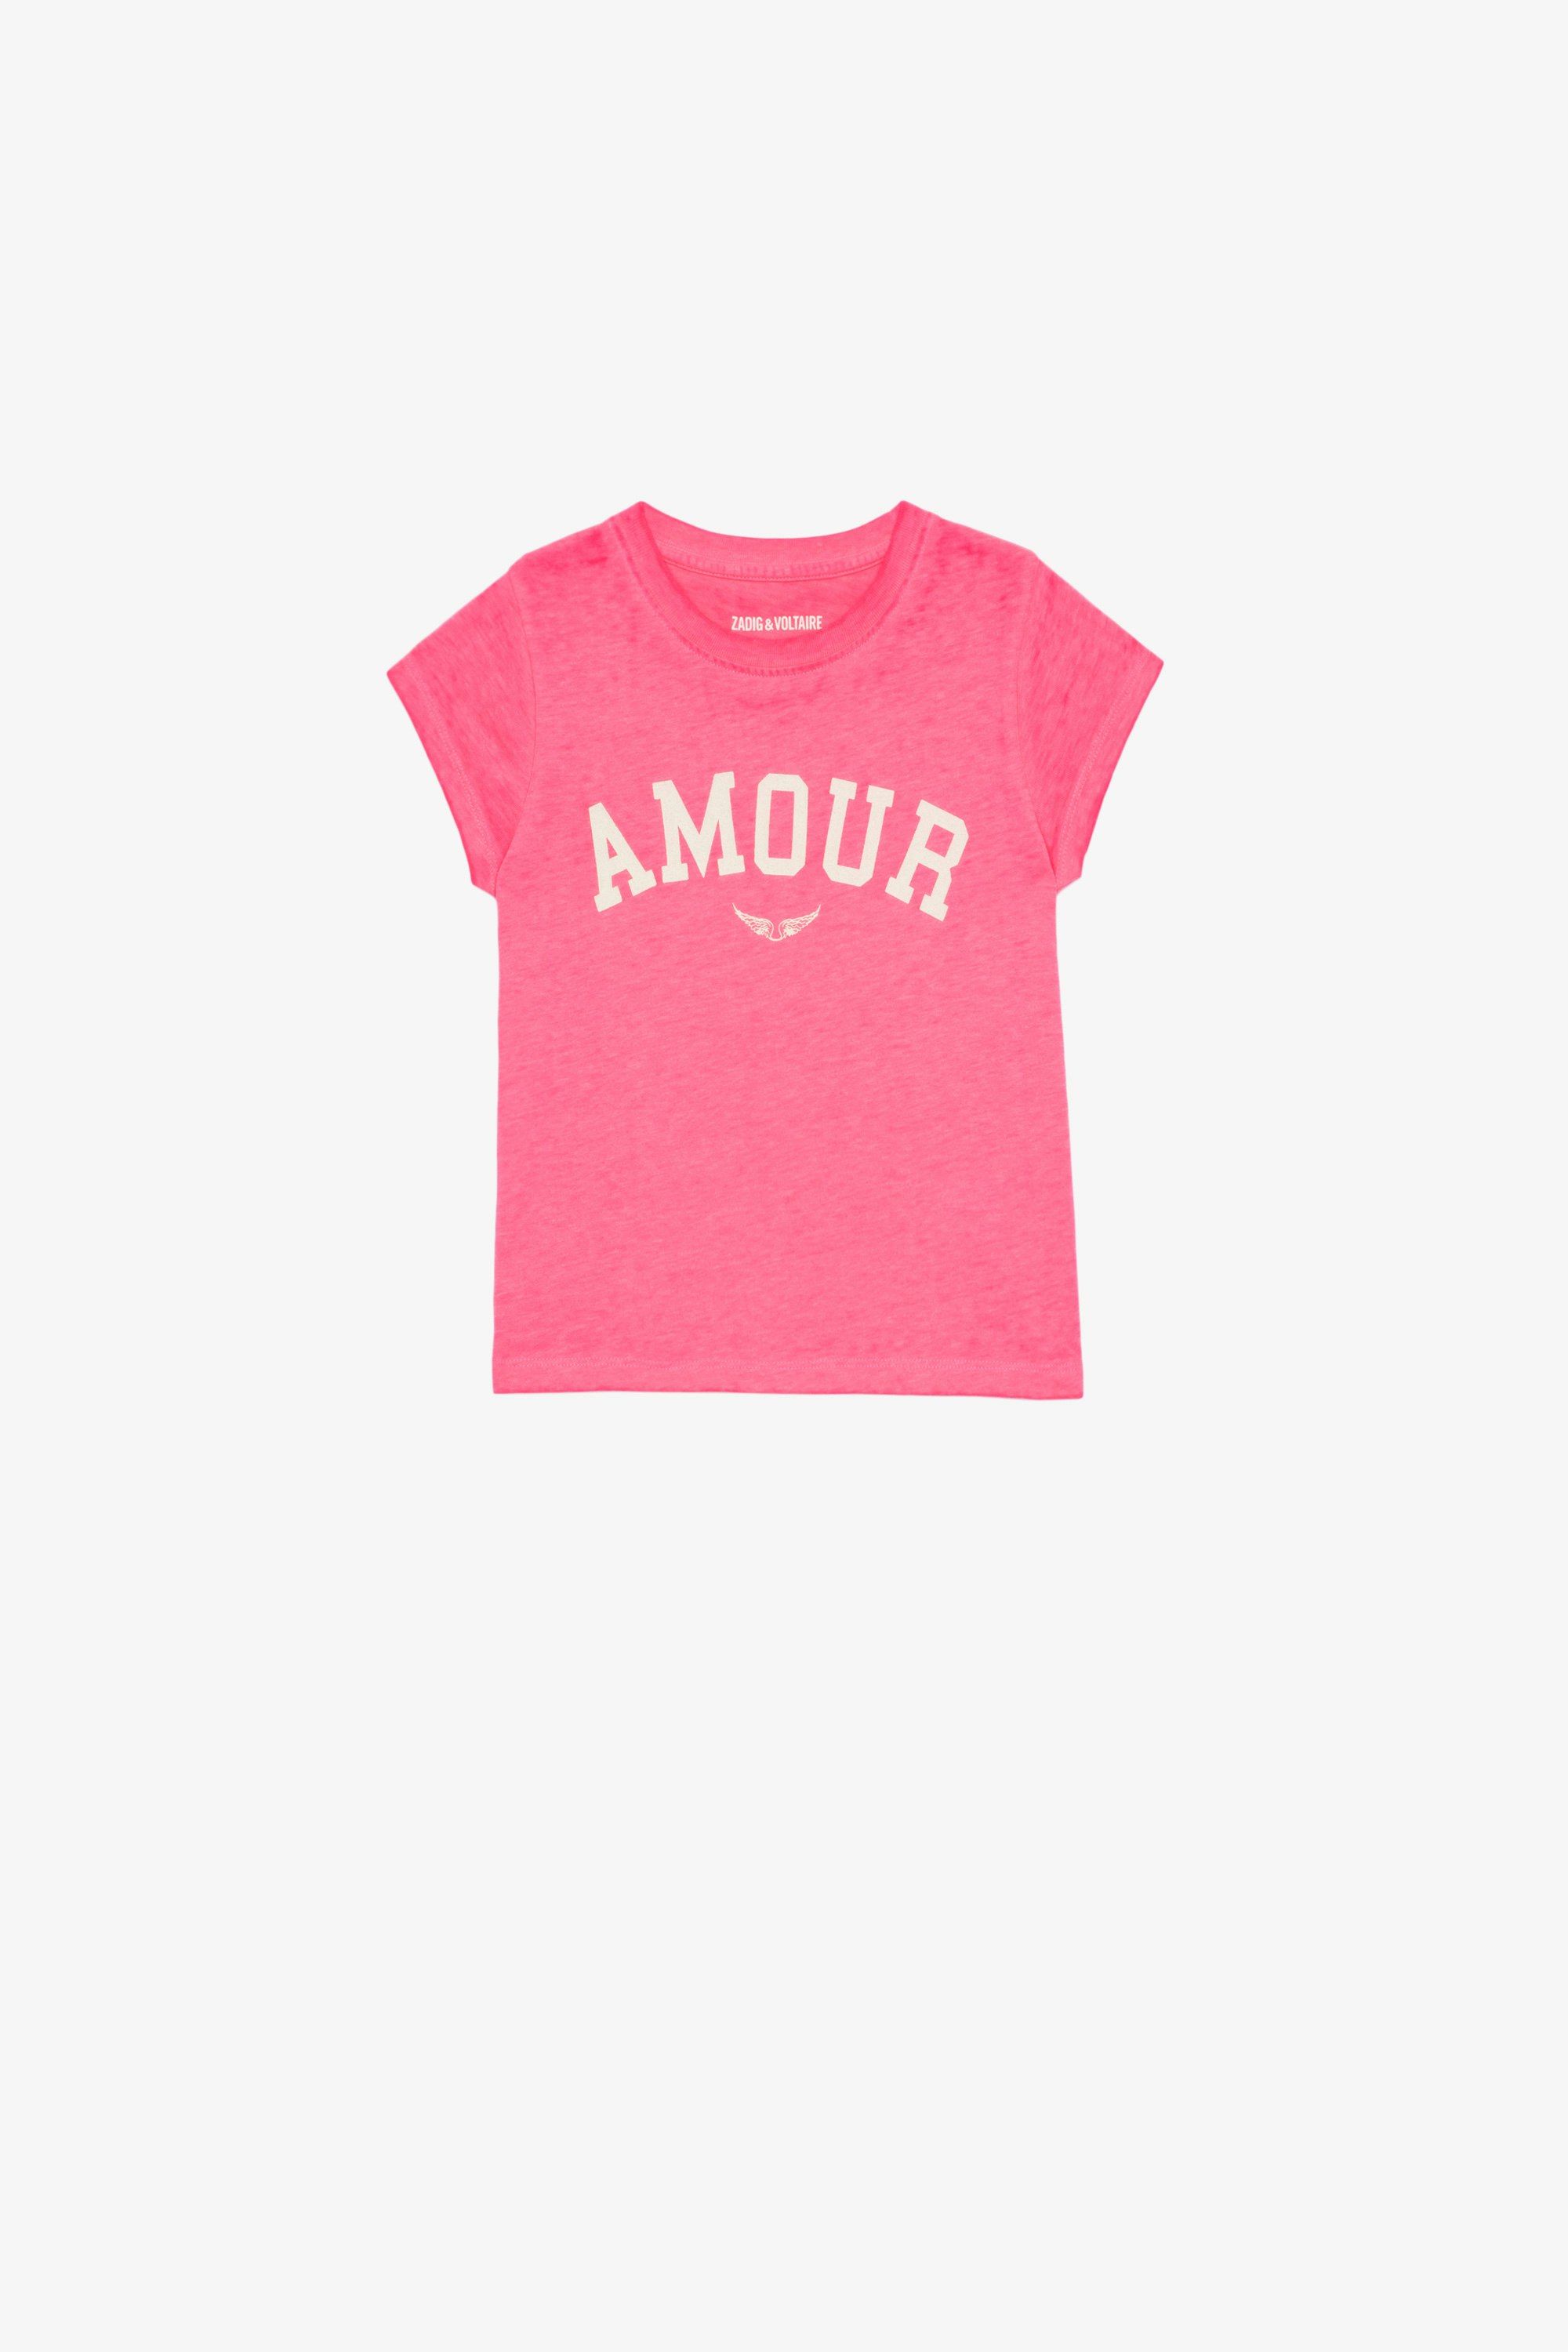 T-shirt Niels Junior T-shirt in jersey di cotone rosa con stampa Amour - Junior